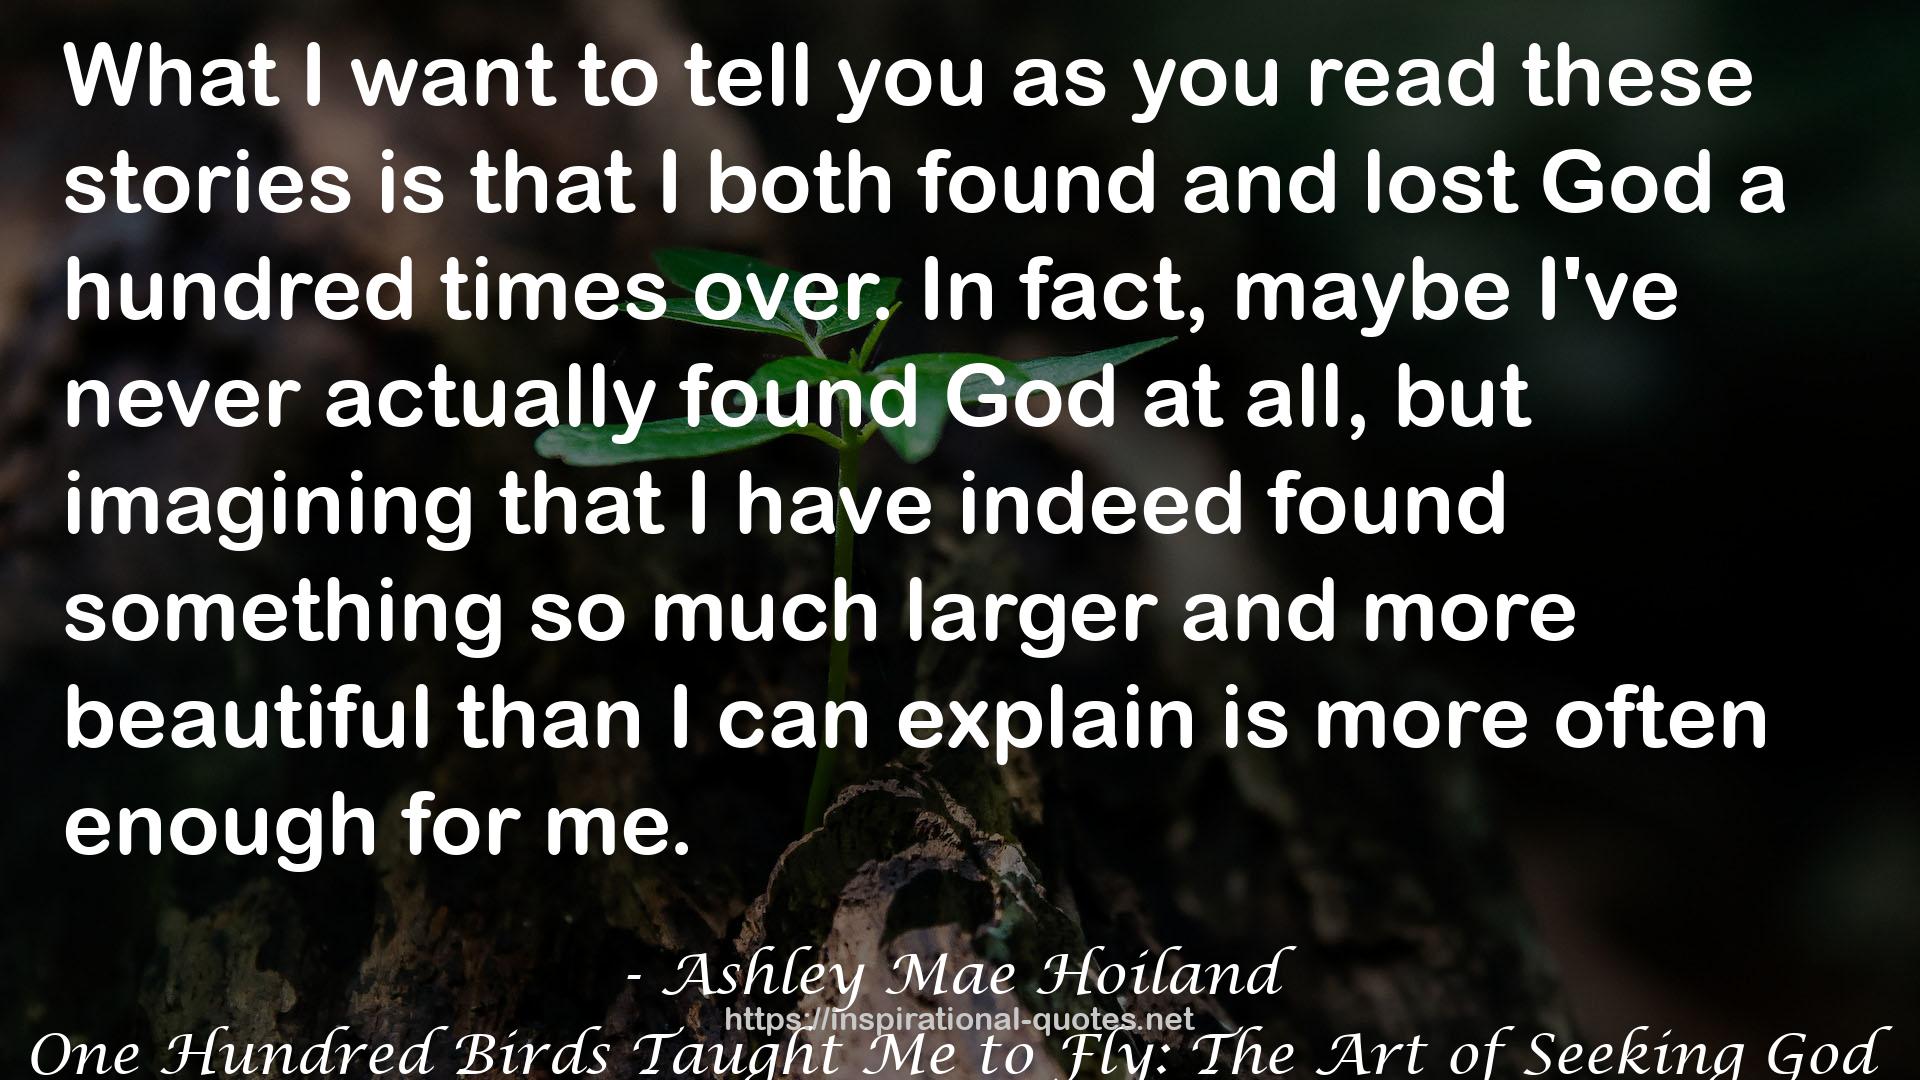 One Hundred Birds Taught Me to Fly: The Art of Seeking God QUOTES